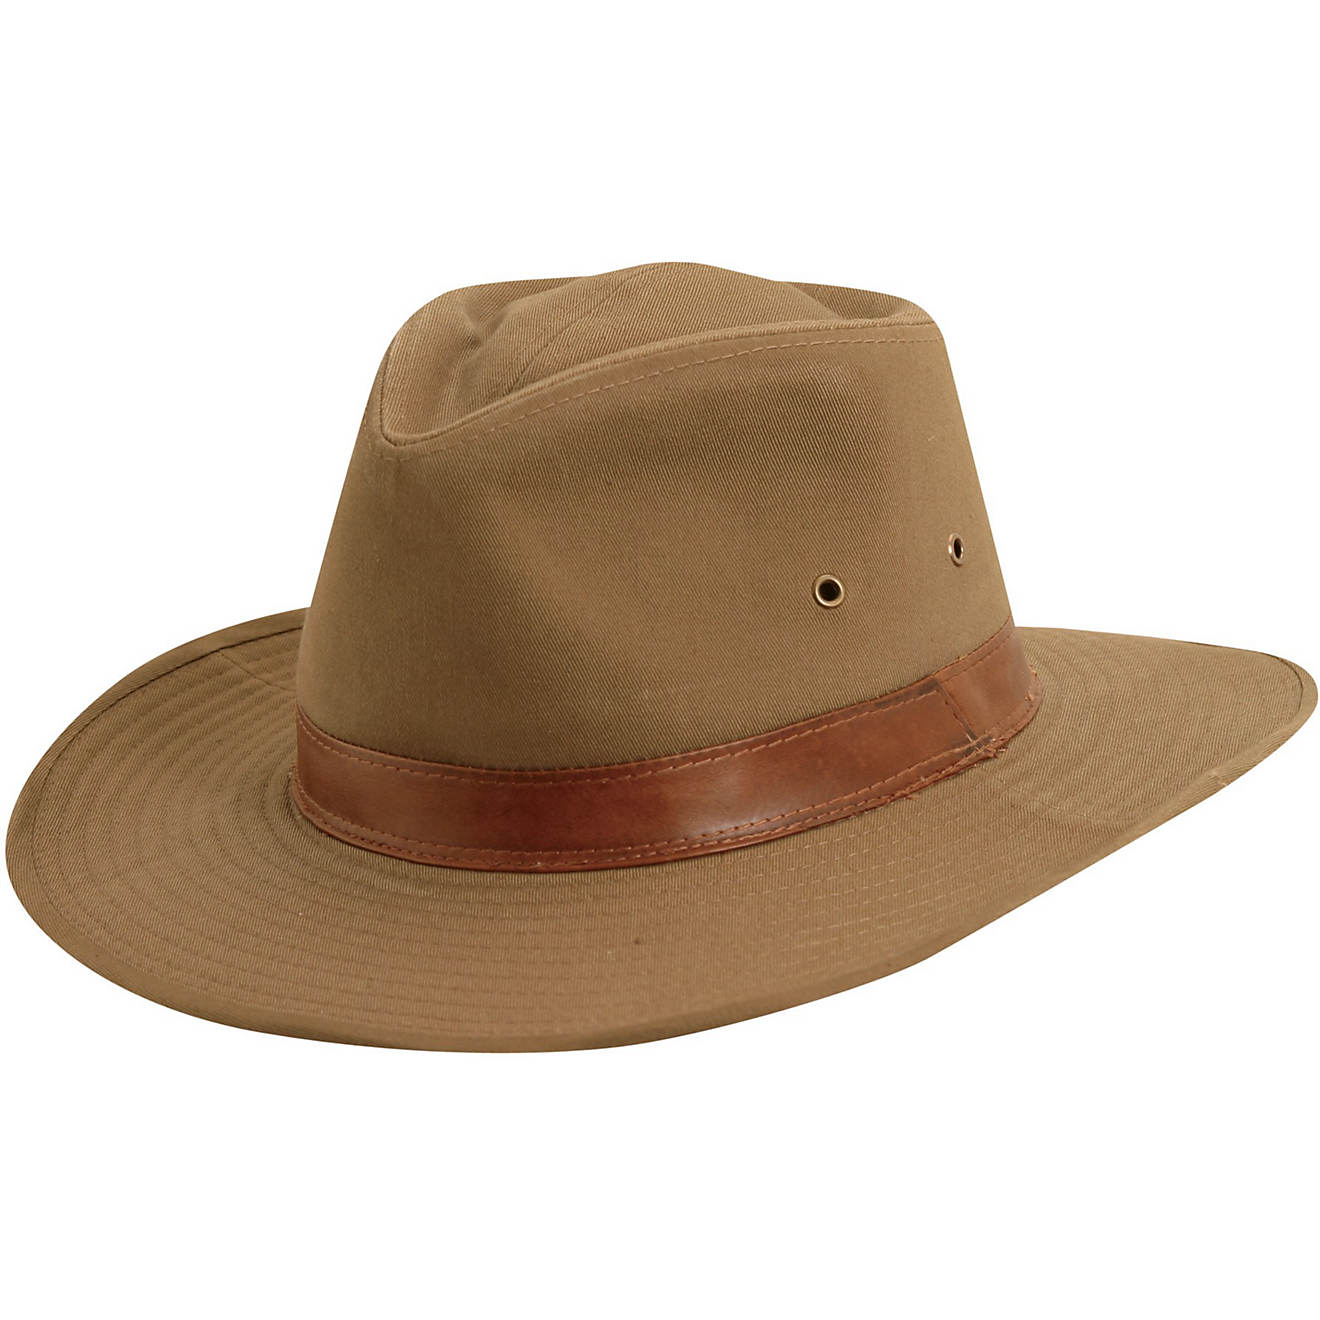 Dorfman Pacific Mens Twill Outback Hat